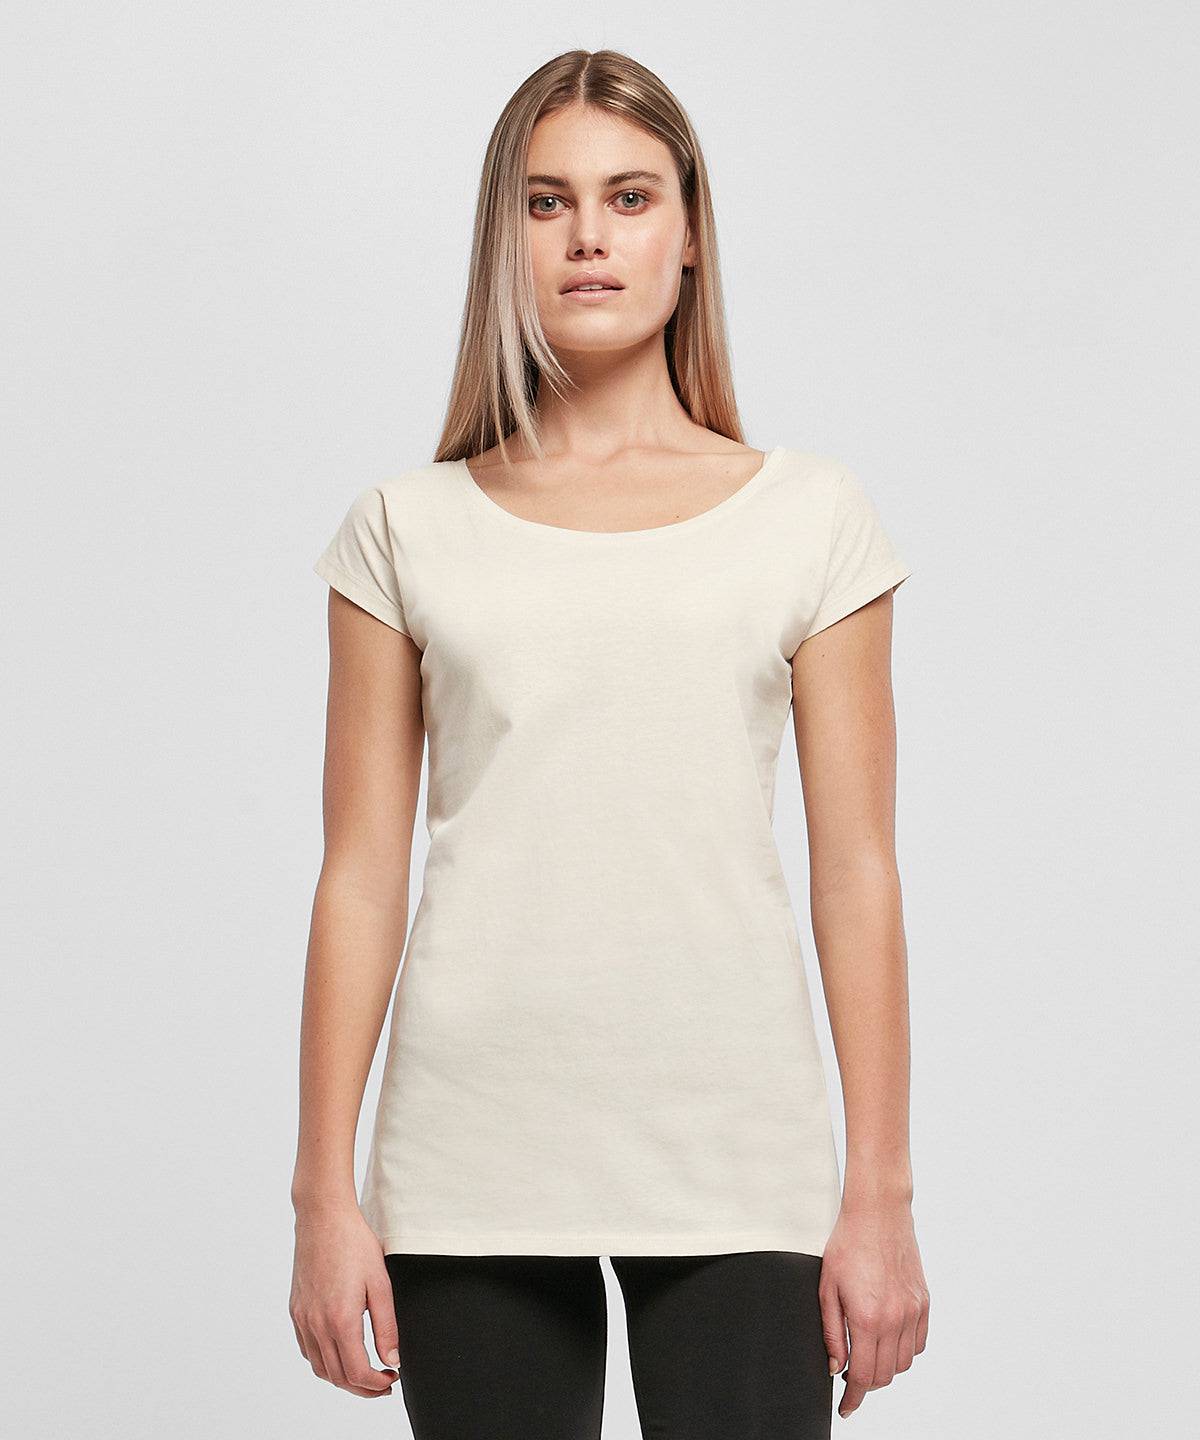 Lilac - Women's wide neck tee